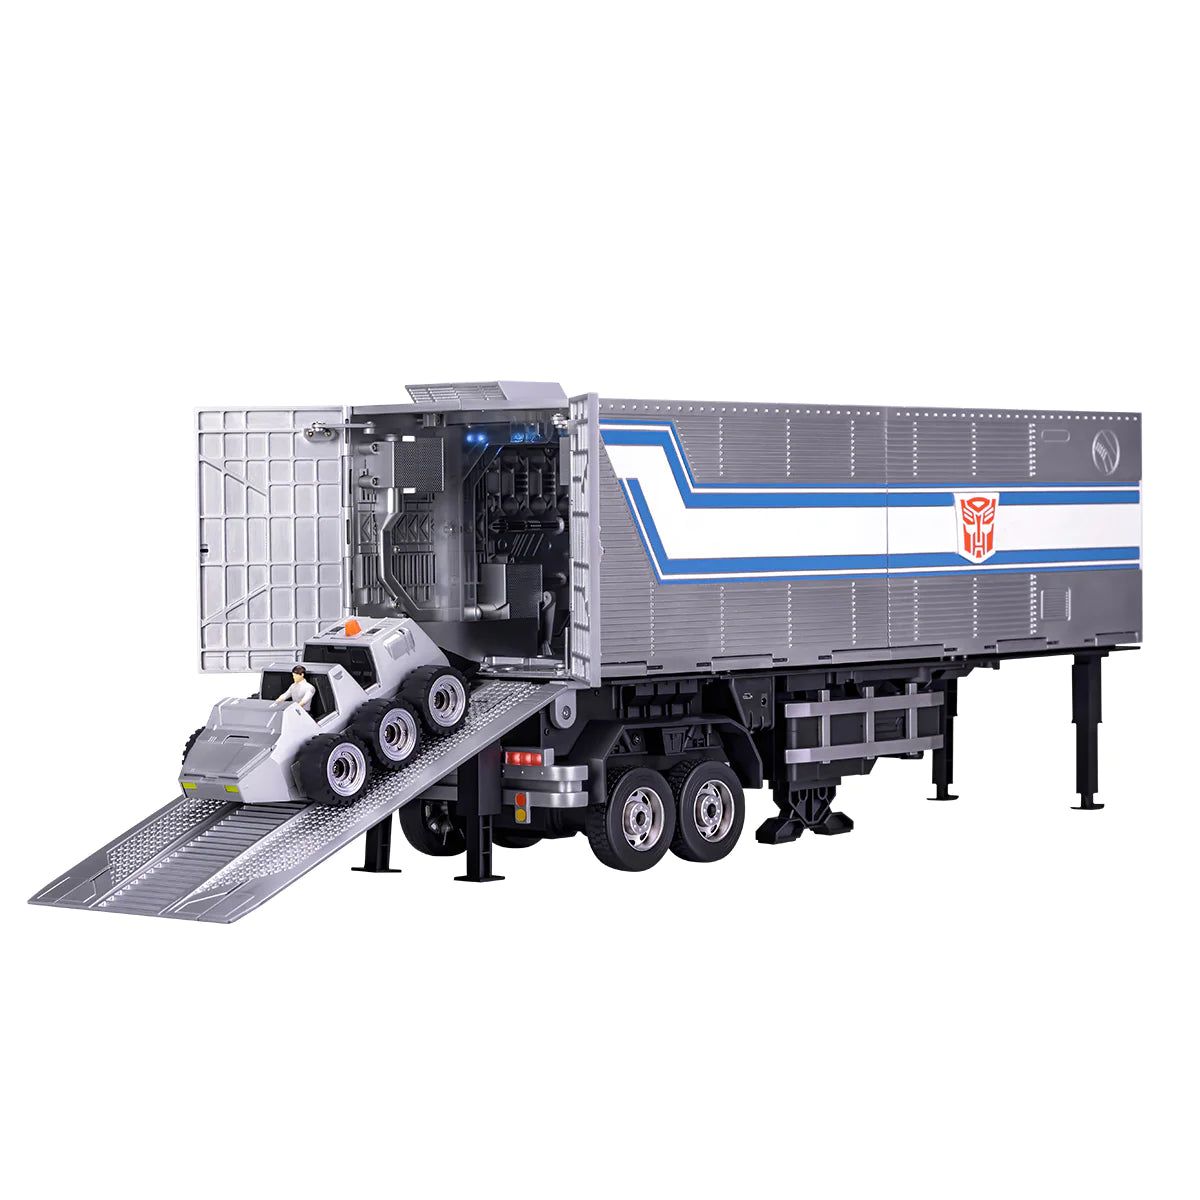 Transformers Optimus Prime Auto-Converting Trailer with Roller By Robosen